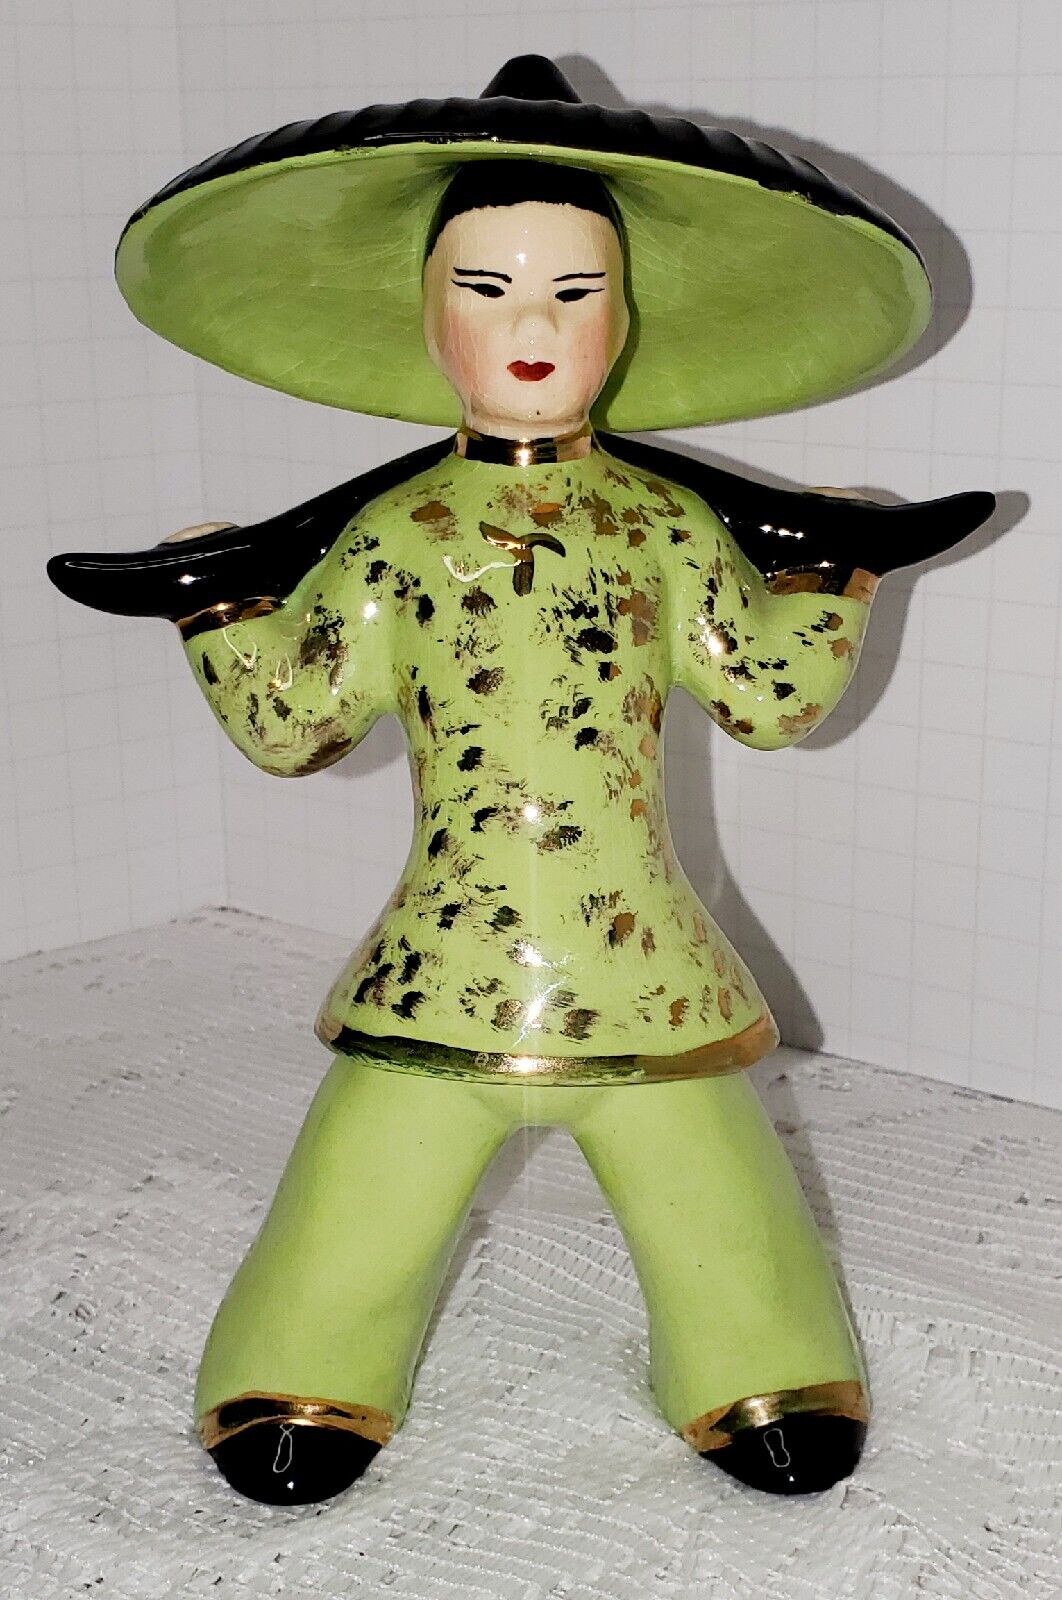 Vintage Ceramic Asian Figurine. Beautiful Green And Gold With Black Hat. 